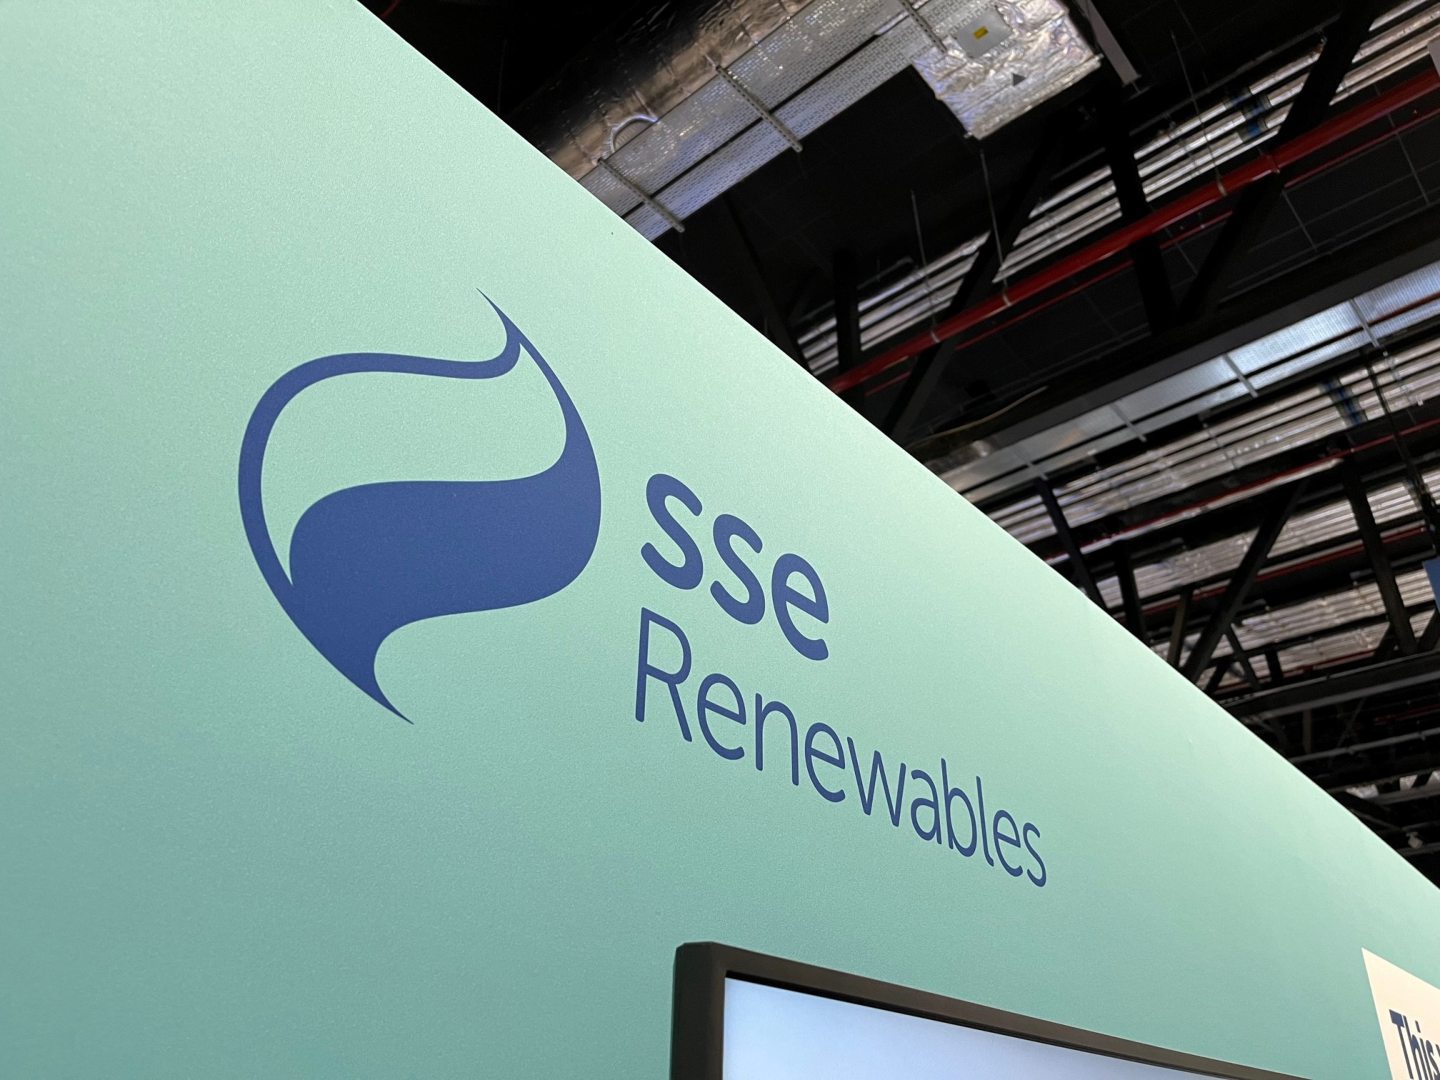 SSE posts 4% drop in profit in full year results